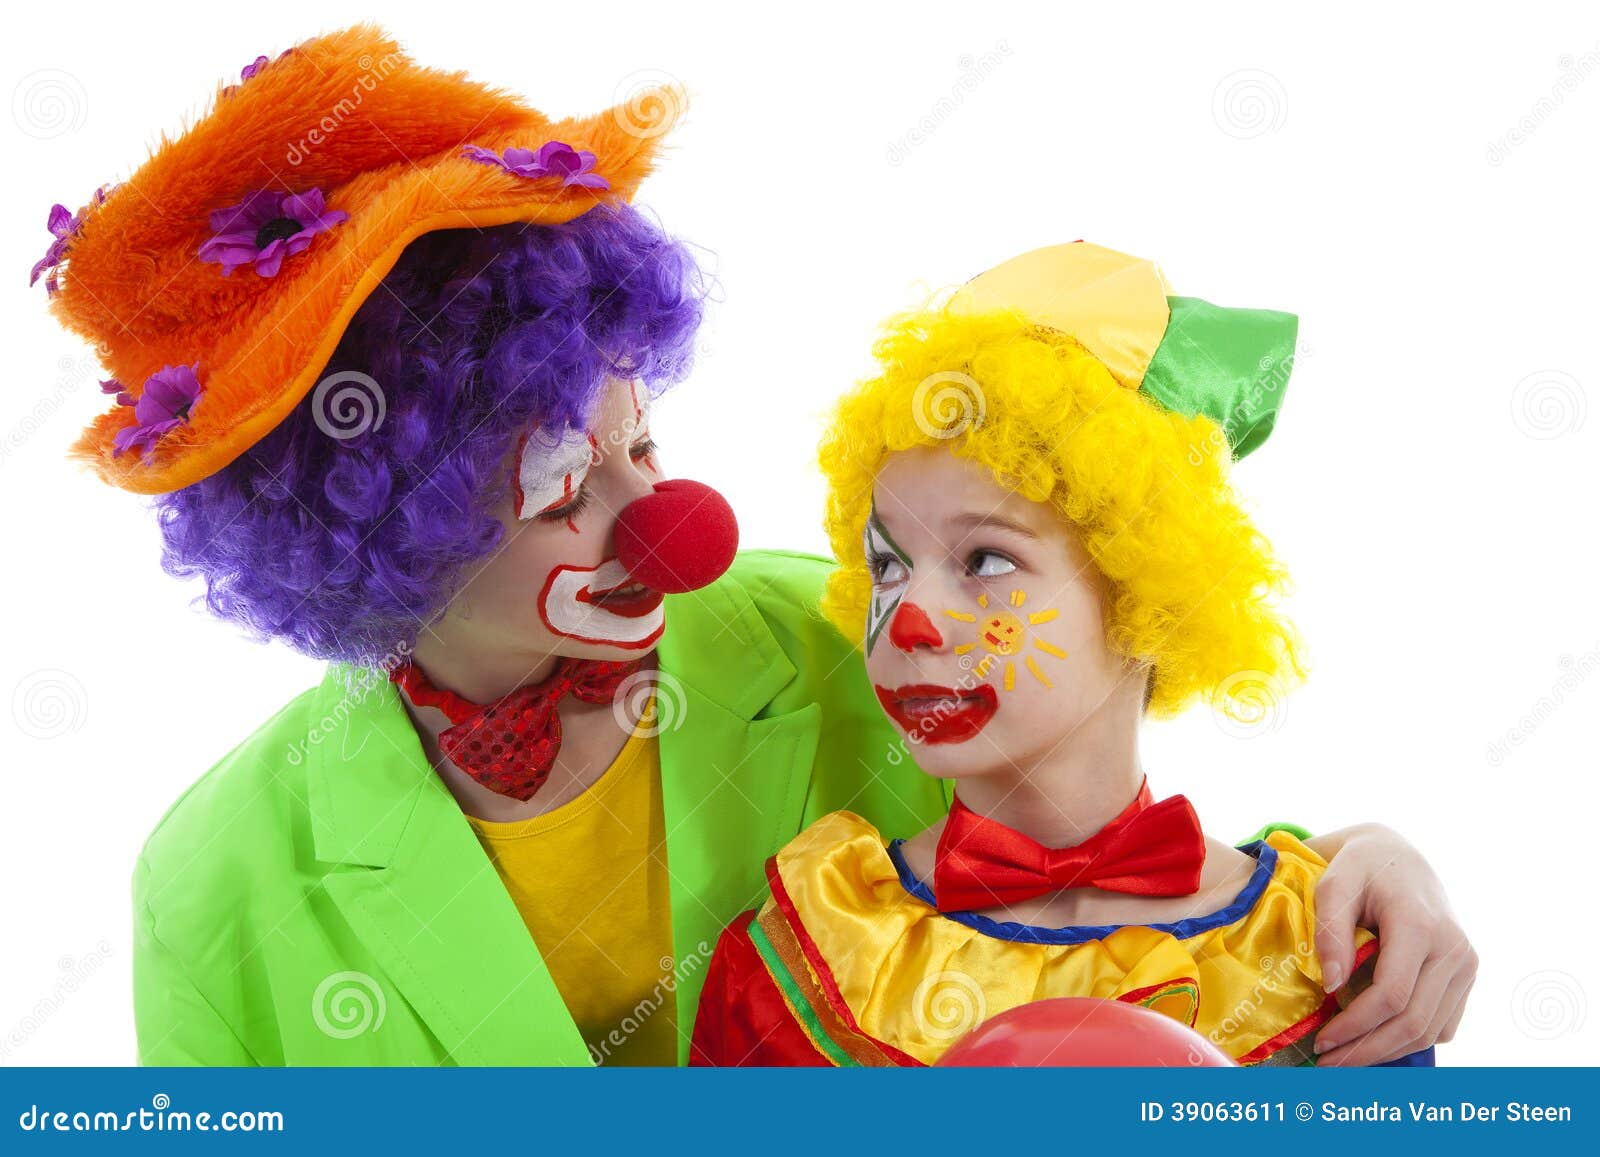 Children Dressed As Colorful Funny Clowns Stock Image - Image of